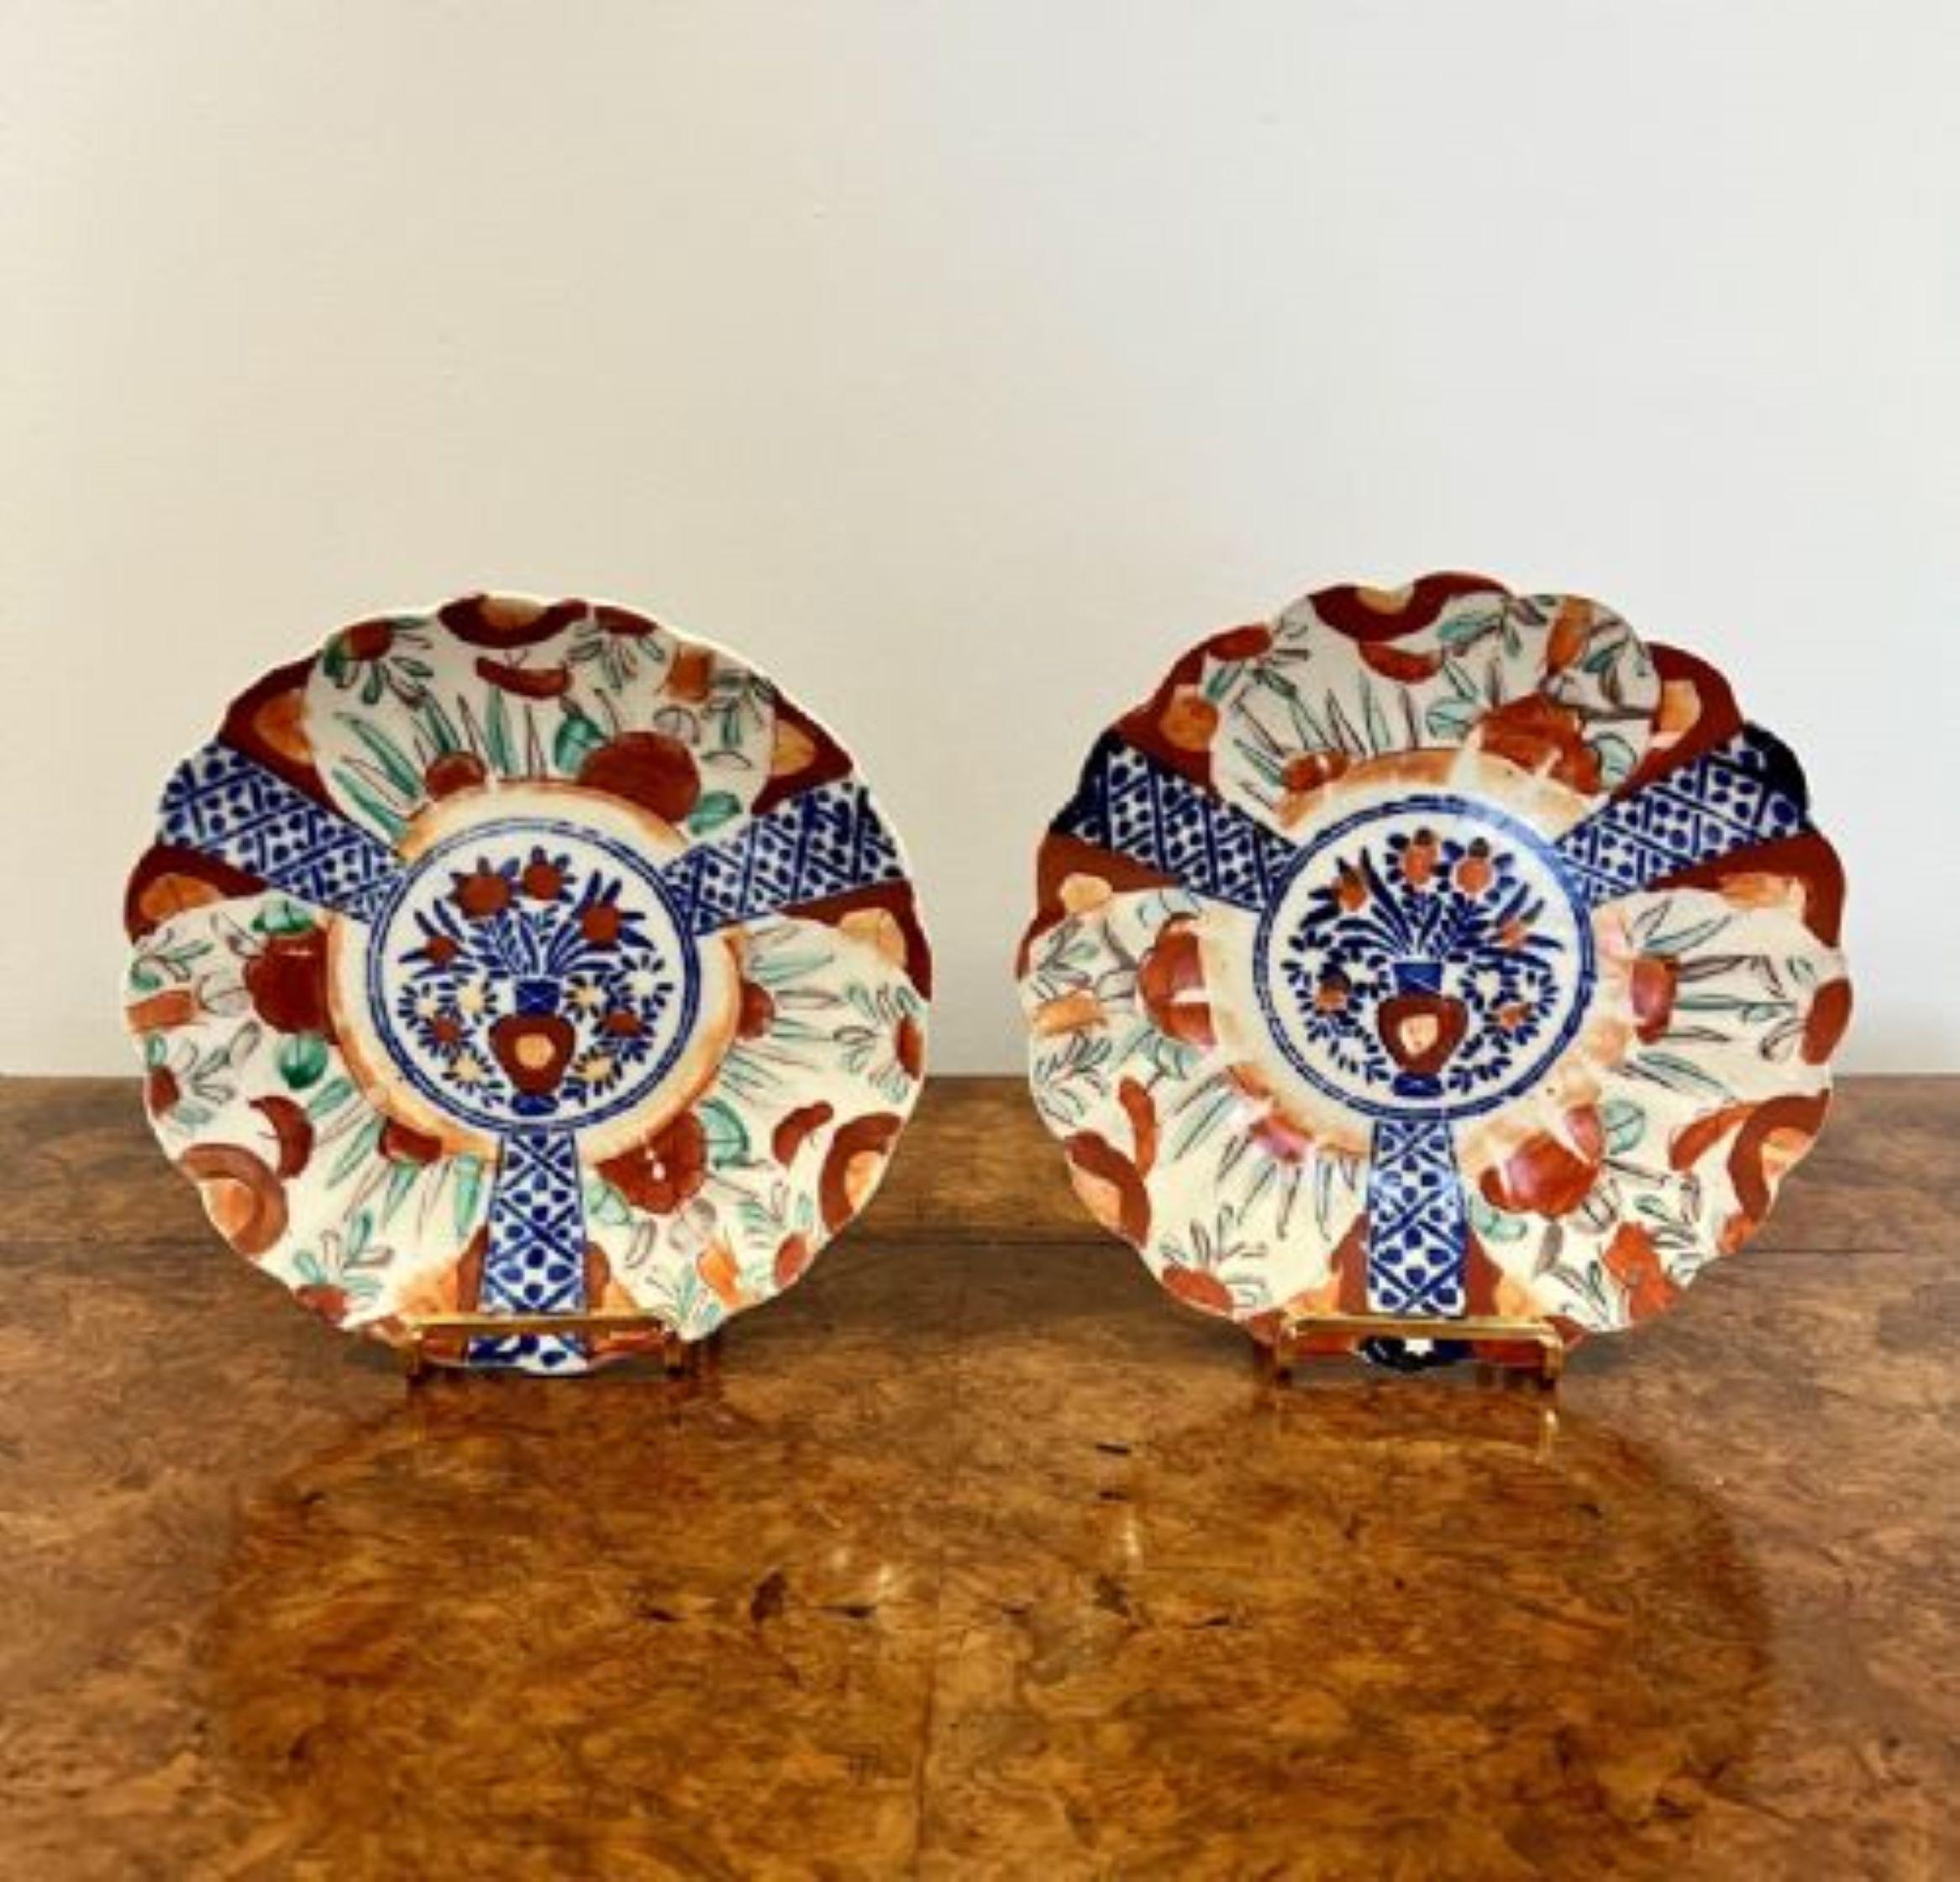 Pair of antique Japanese imari plates having a lovely pair of antique Japanese imari plates with scalloped shaped edges, hand painted with a vase of flowers to the centre surrounded by flowers and leaves in wonderful red, green, blue and white